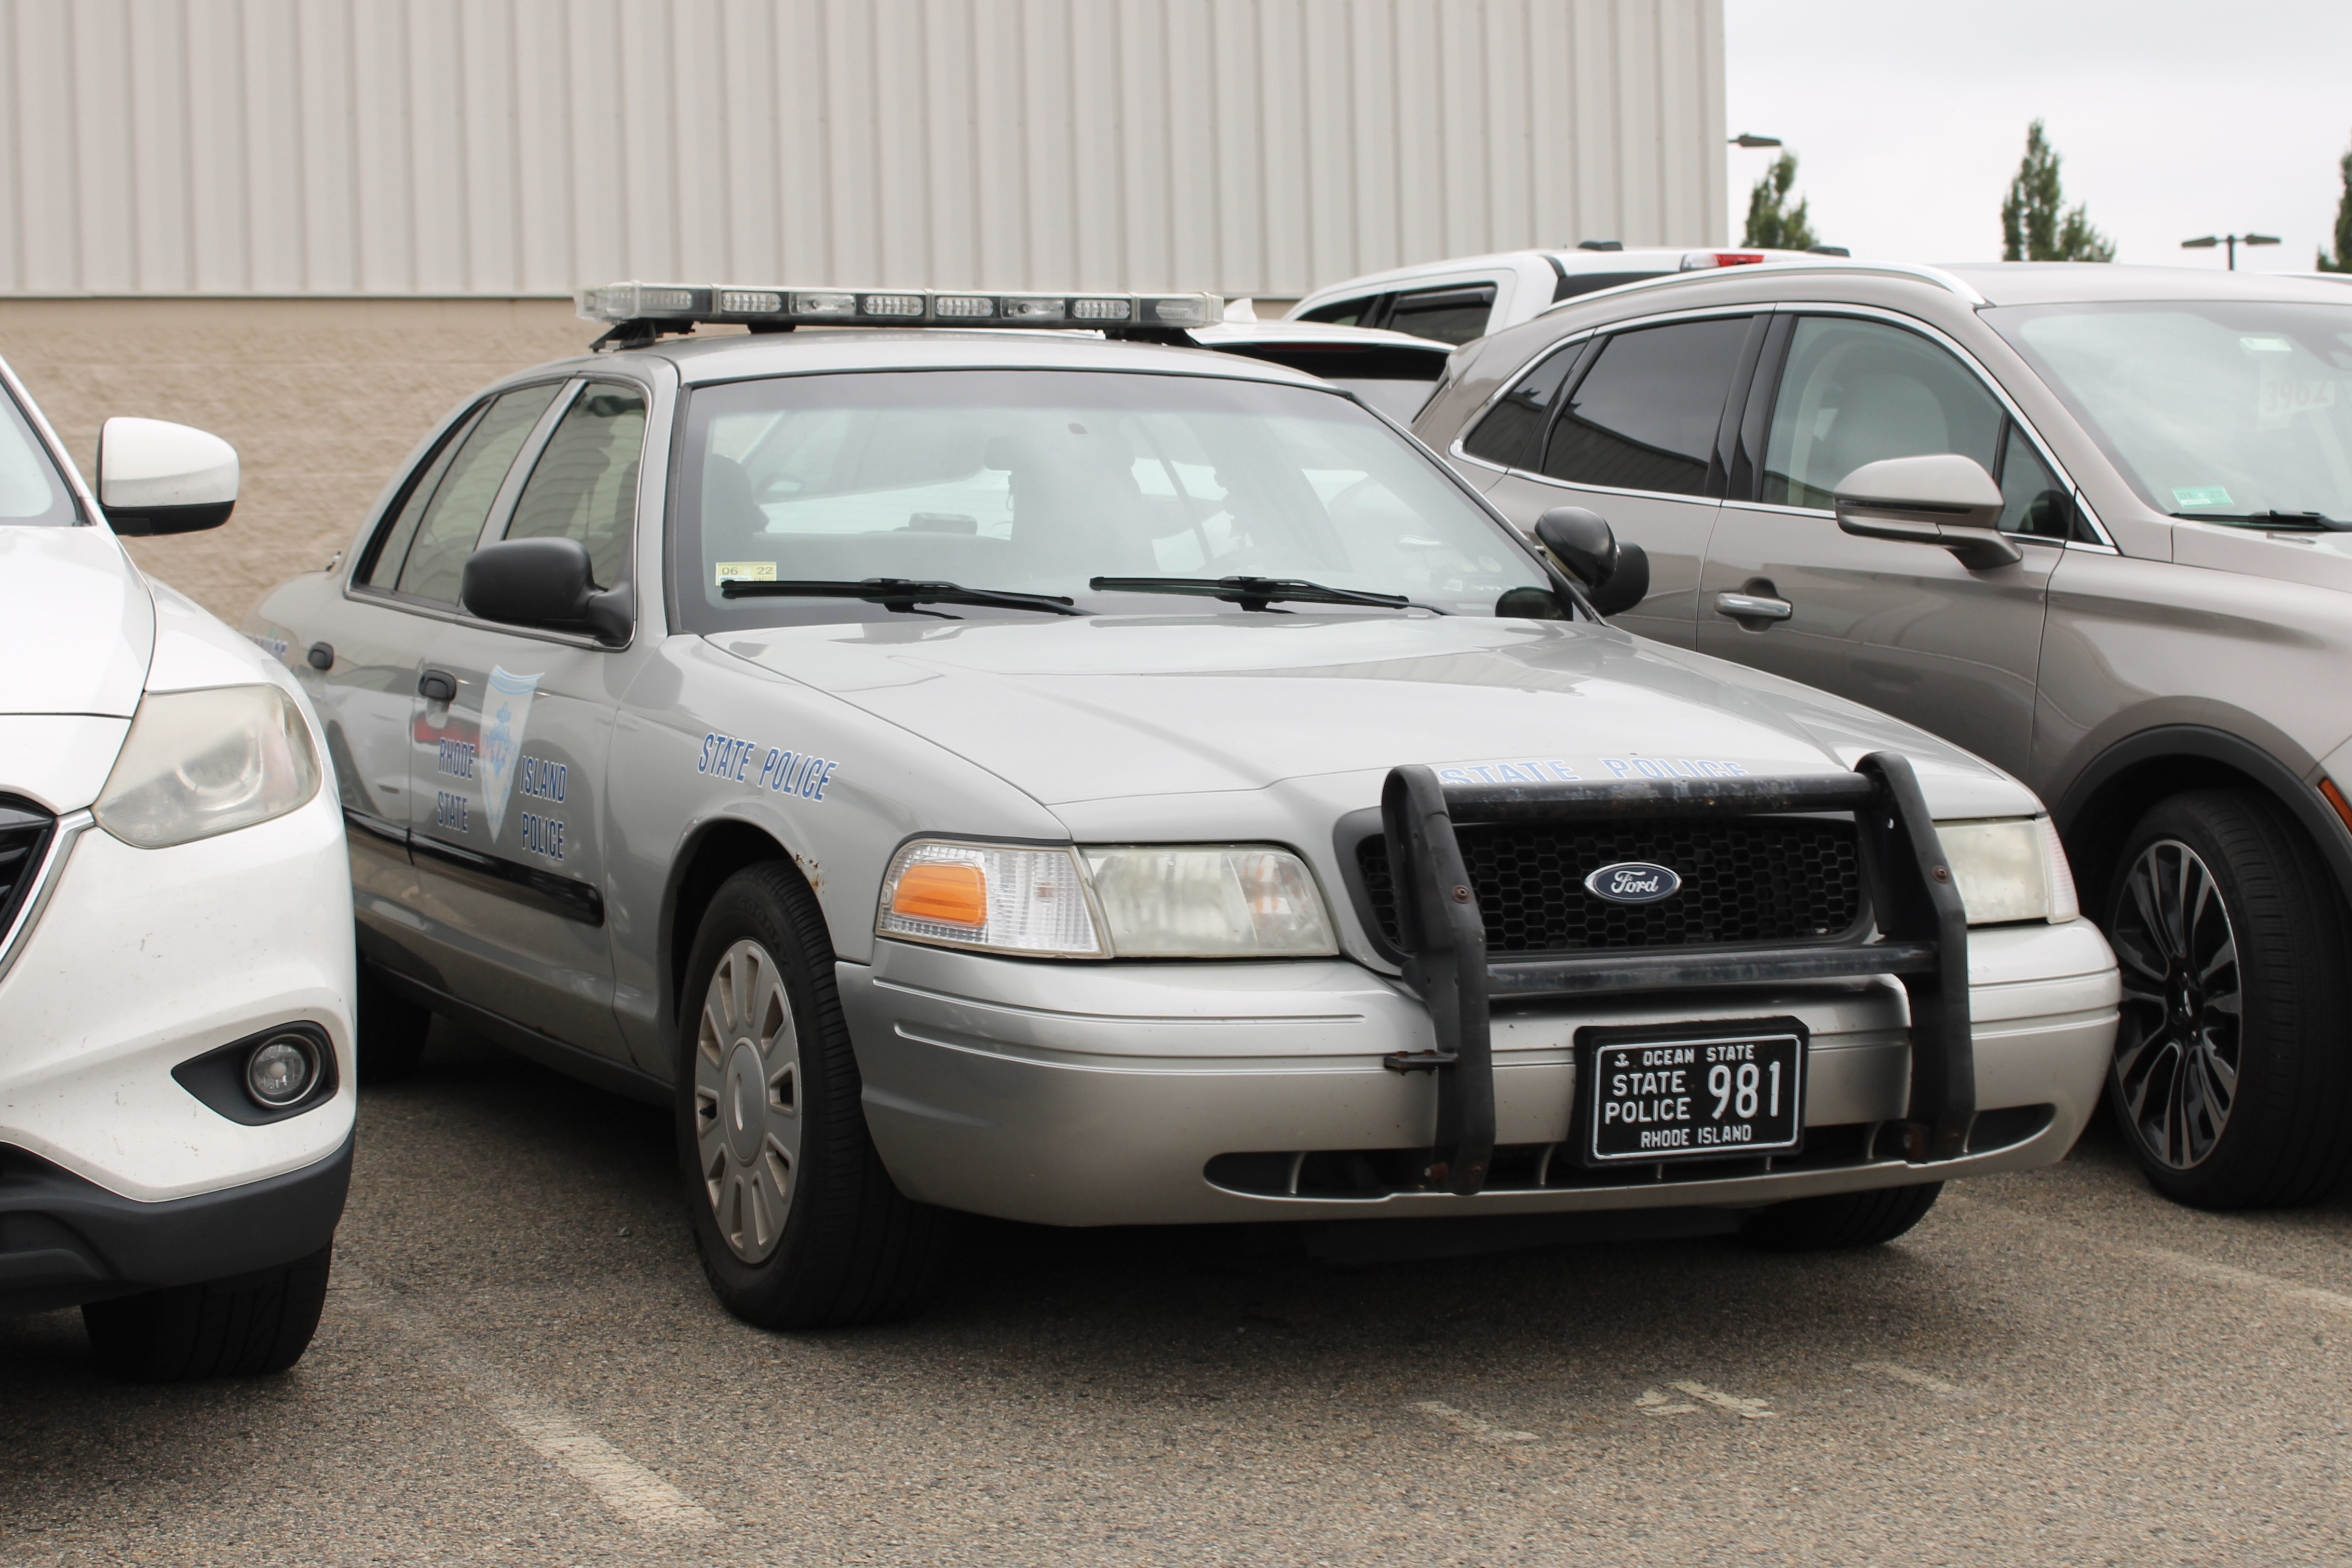 A photo  of Rhode Island State Police
            Cruiser 981, a 2006-2008 Ford Crown Victoria Police Interceptor             taken by @riemergencyvehicles